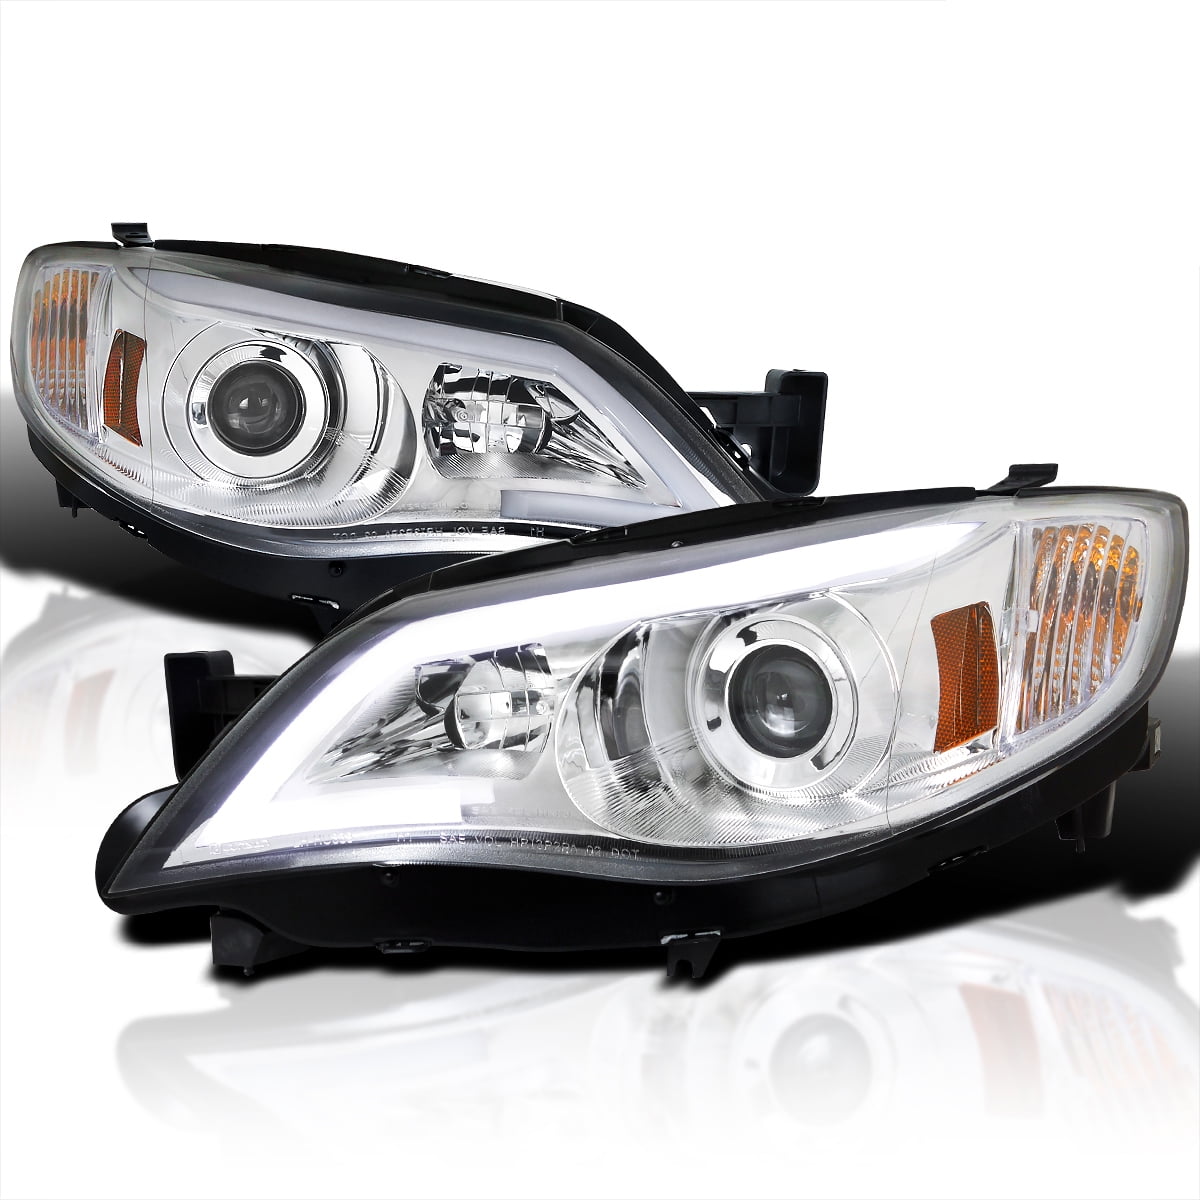 Spec-D Tuning Chrome Housing Clear Lens Projector Headlights Compatible with Subaru Legacy 2010-2014 Outback L+R Pair Head Light Lamp Assembly 